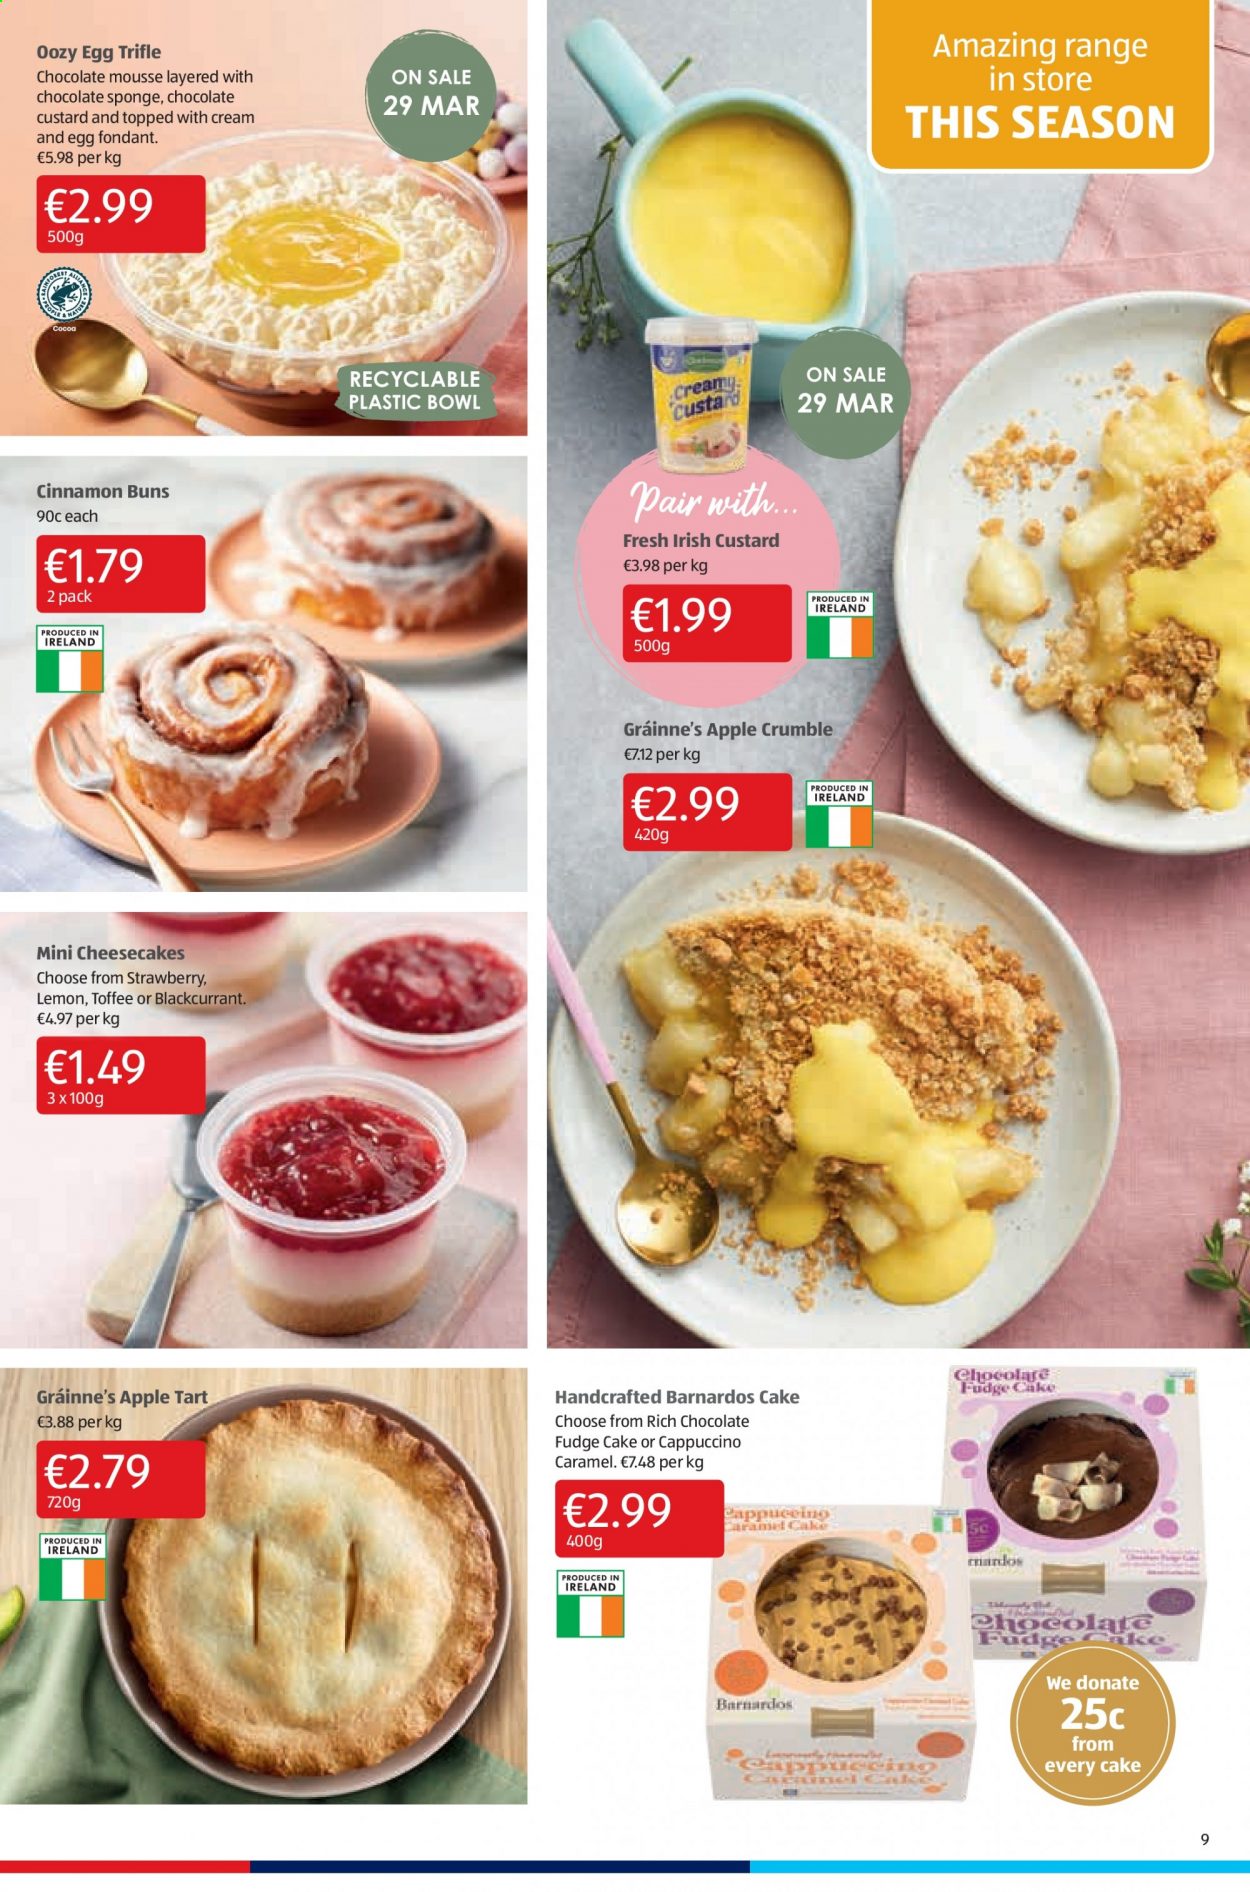 thumbnail - Aldi offer  - 01.04.2021 - 07.04.2021 - Sales products - cake, tart, buns, eggs, fudge, chocolate, toffee, cocoa, cinnamon, caramel, cappuccino, sponge, bowl. Page 9.